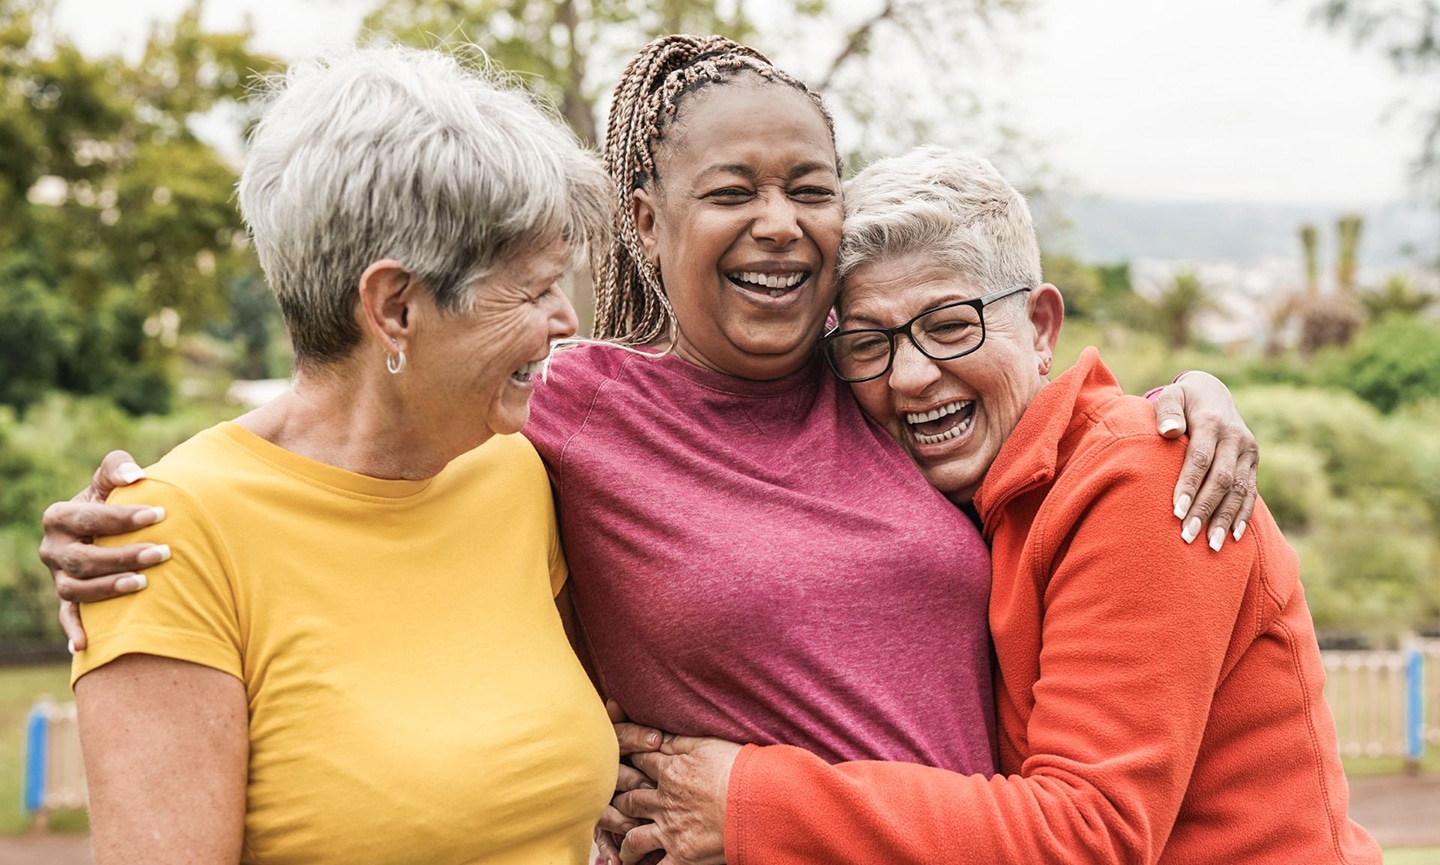 A group of Medicare aged women hugging eachother at a park